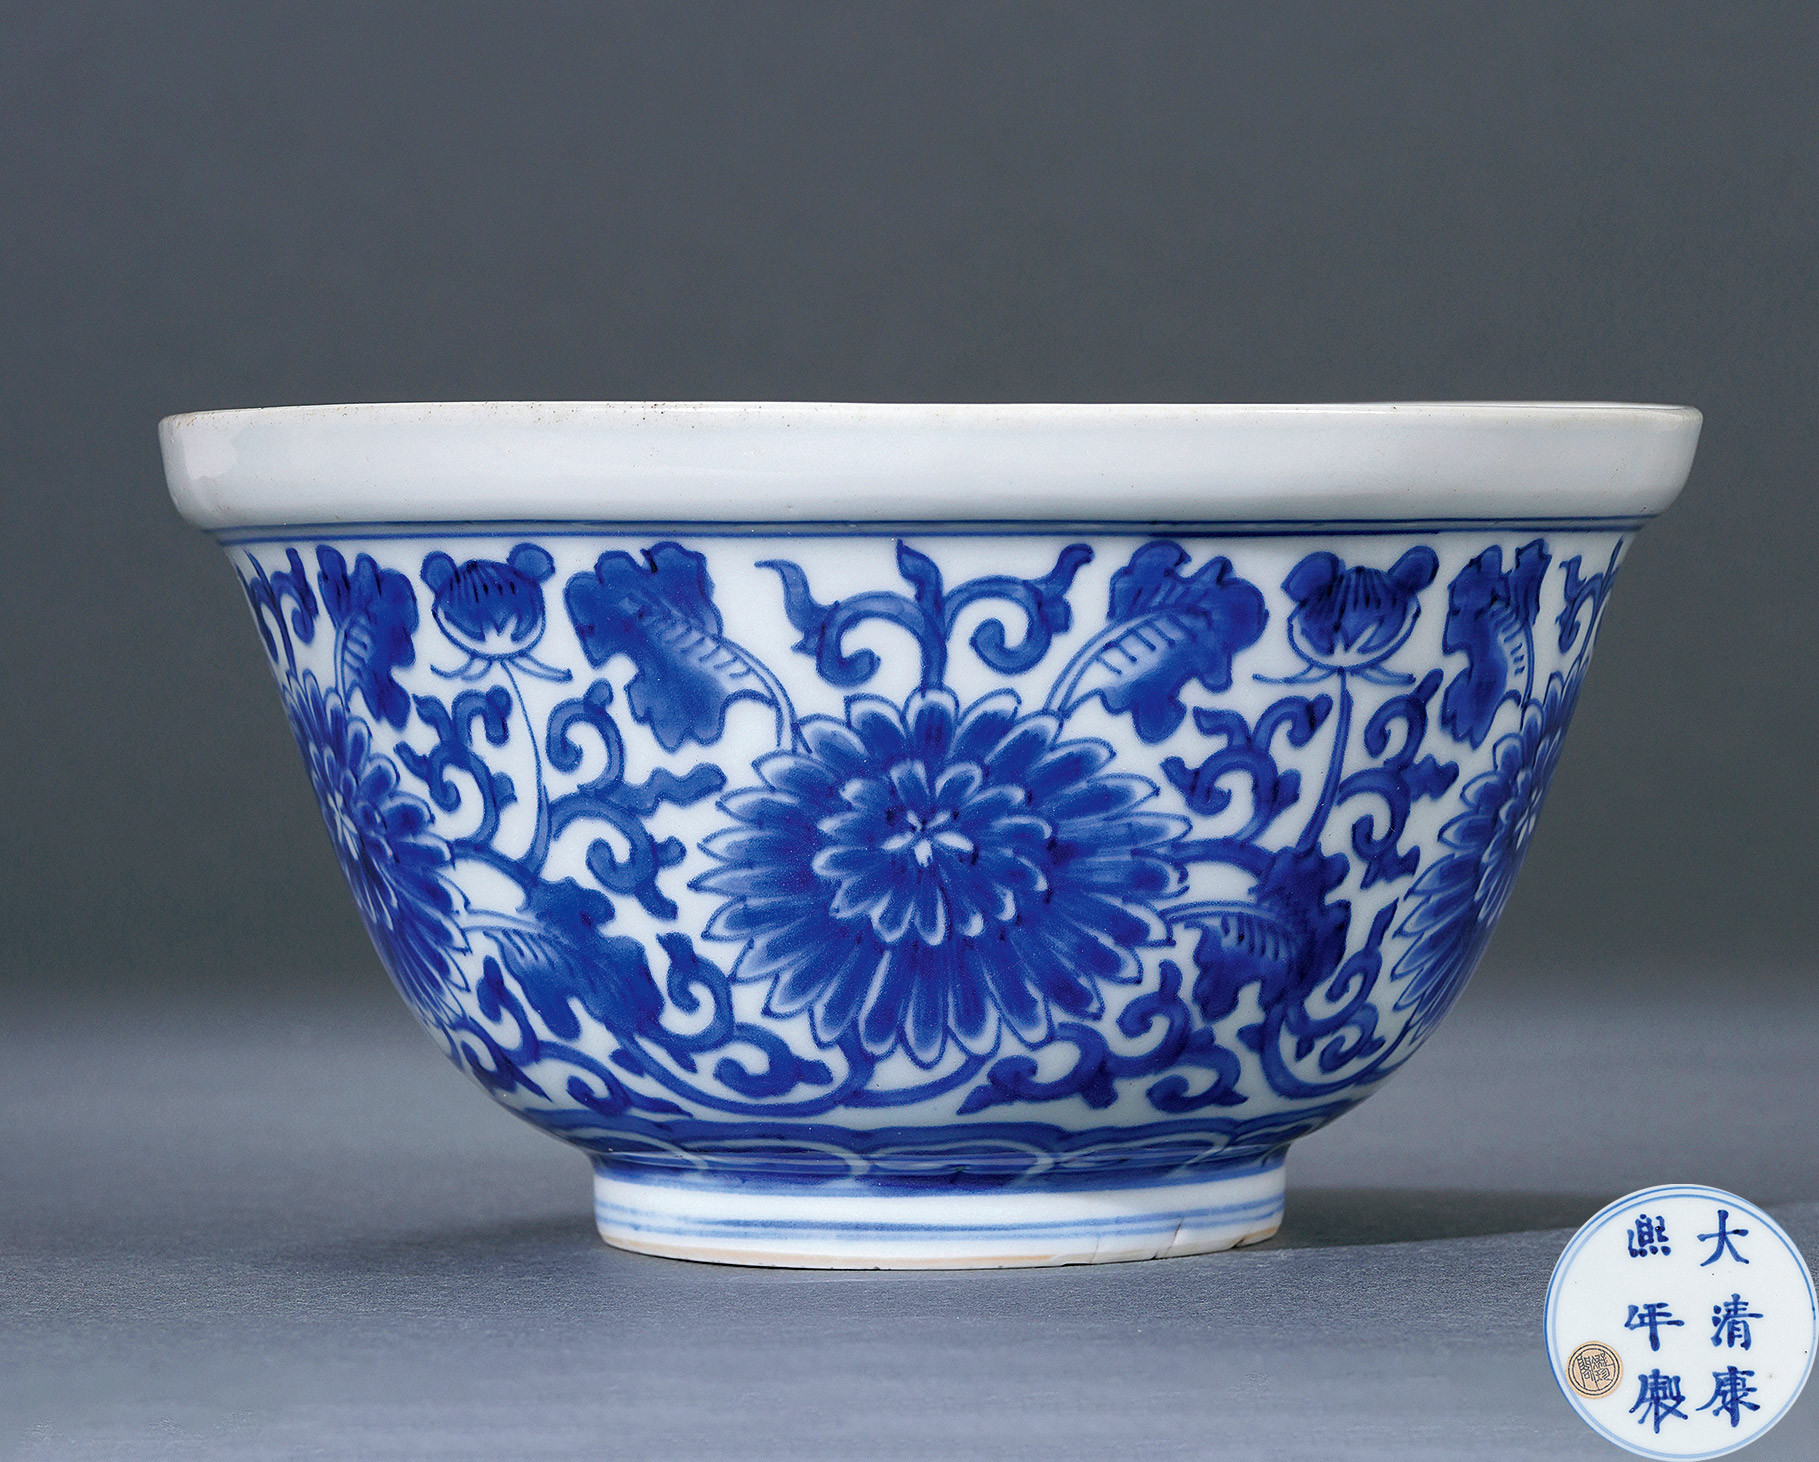 A BLUE AND WHITE BOWL WITH FLOWER DESIGN